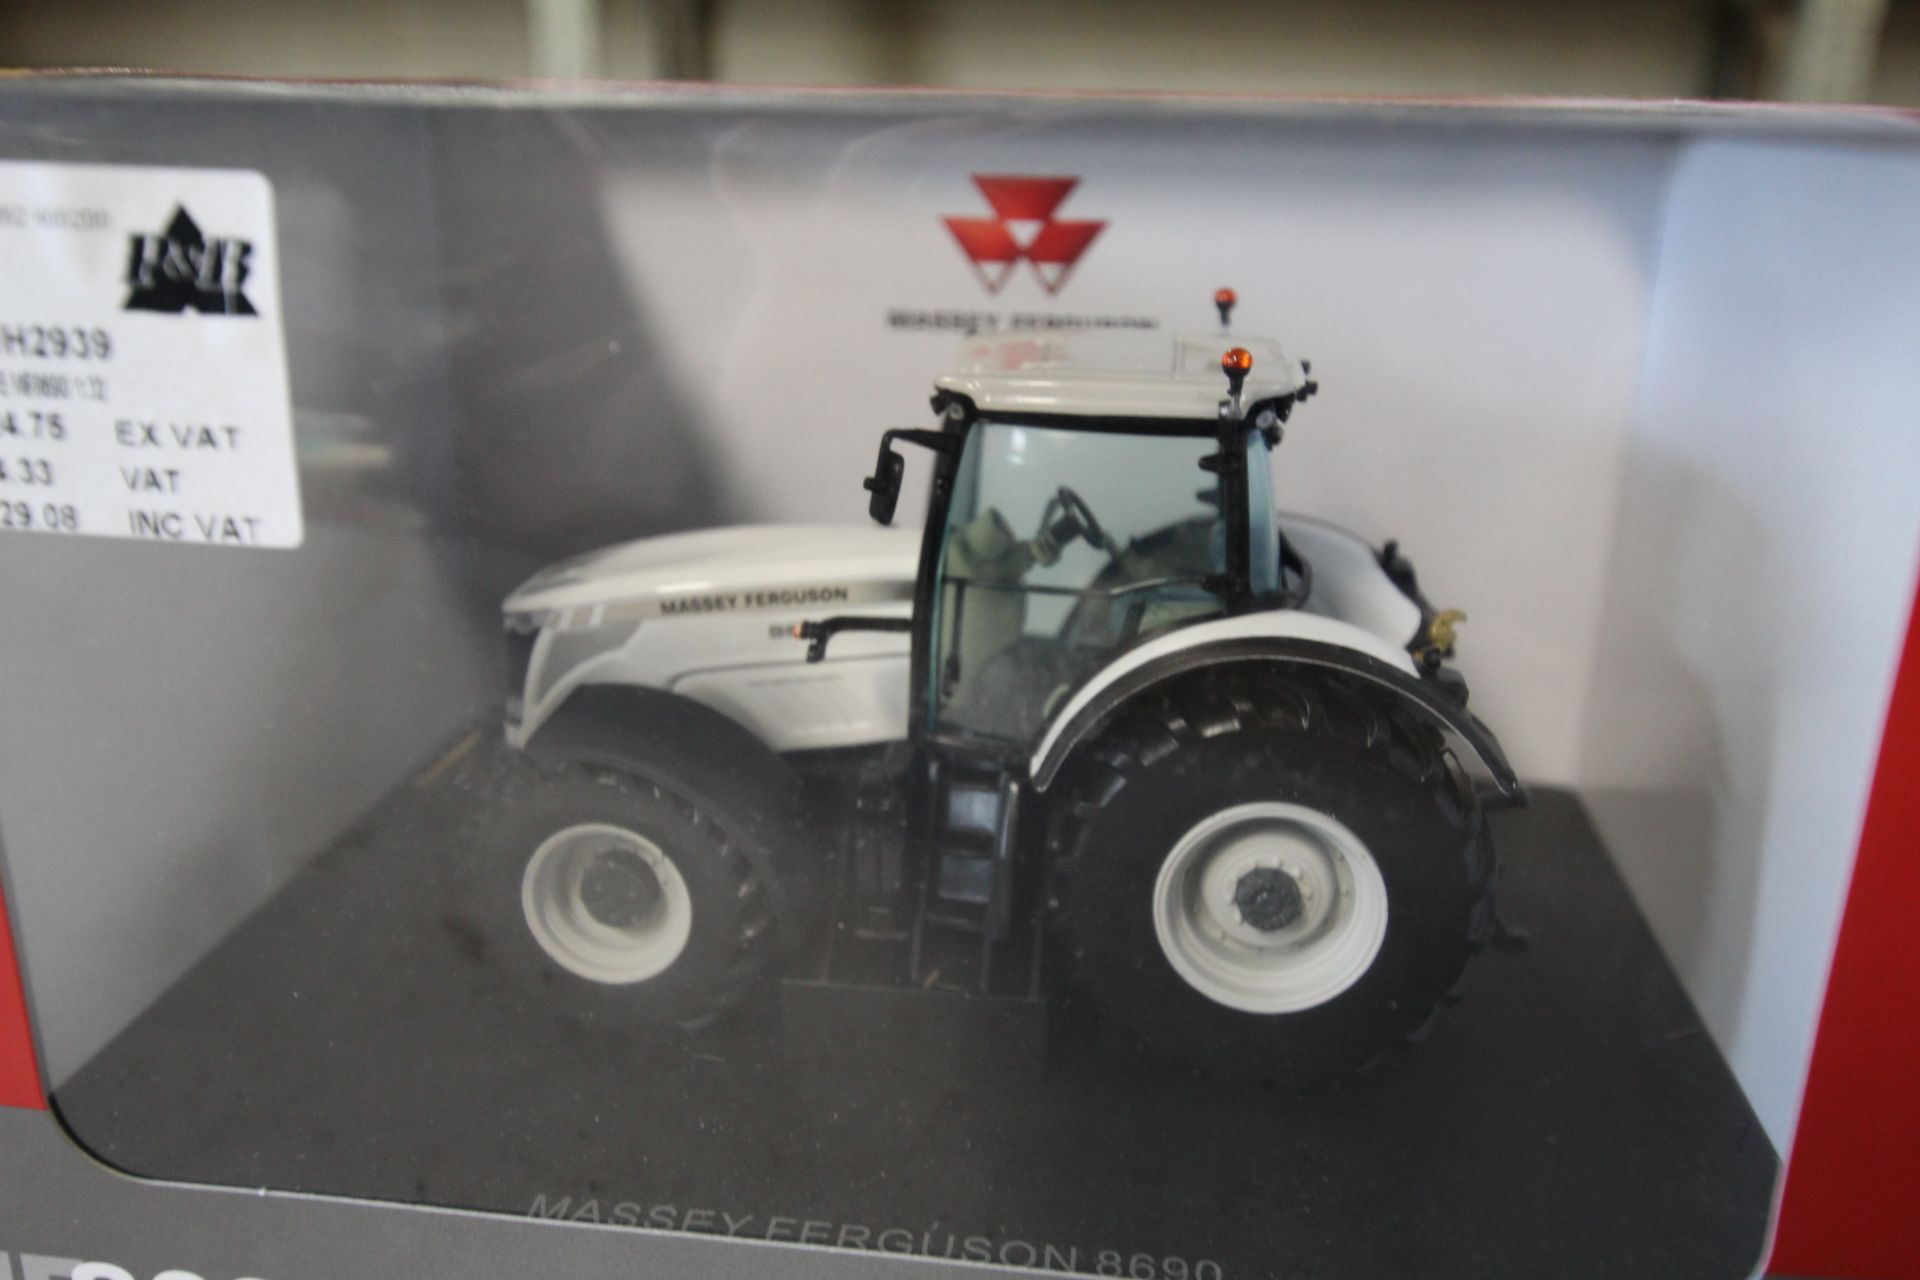 UH Massey Ferguson 8690 Tractor White Limited Edition 1/32 scale. - Image 2 of 2